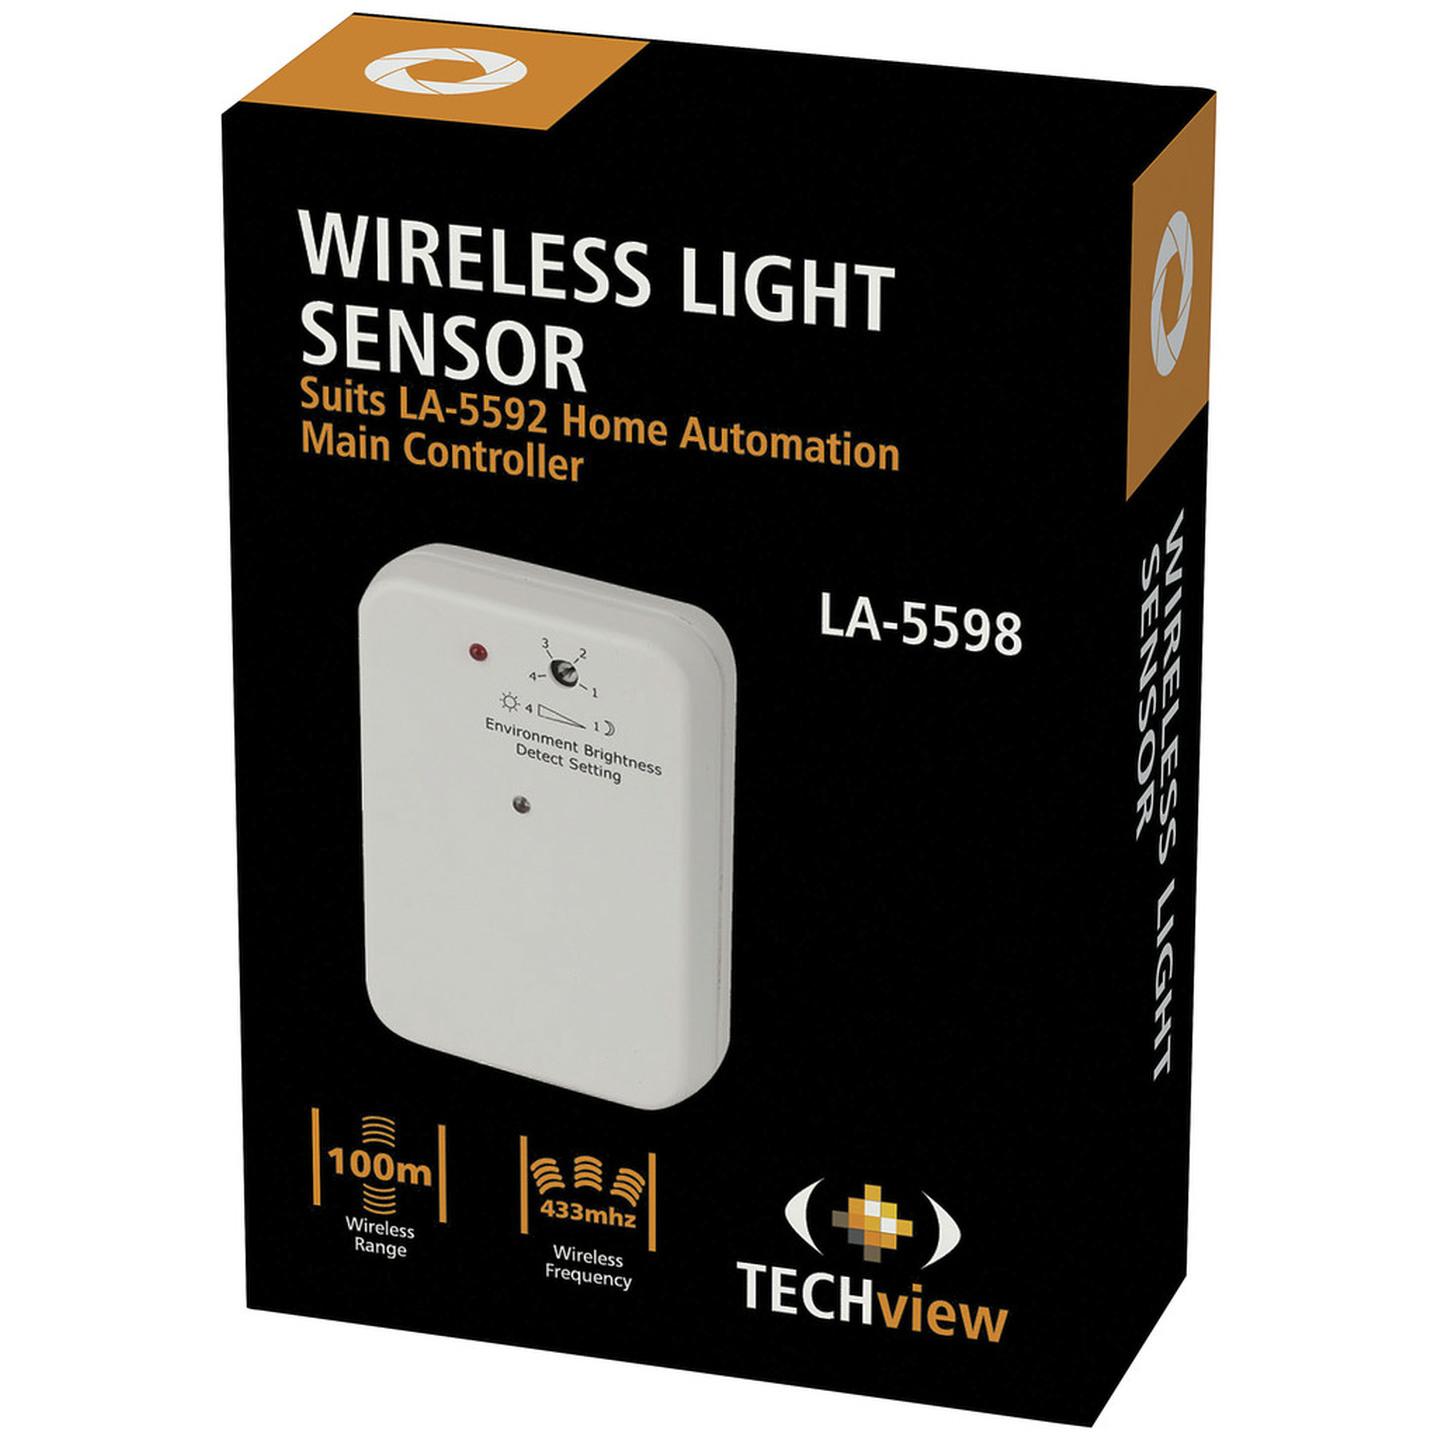 Wireless Sensor Light Module to Suit Home Automation Systems